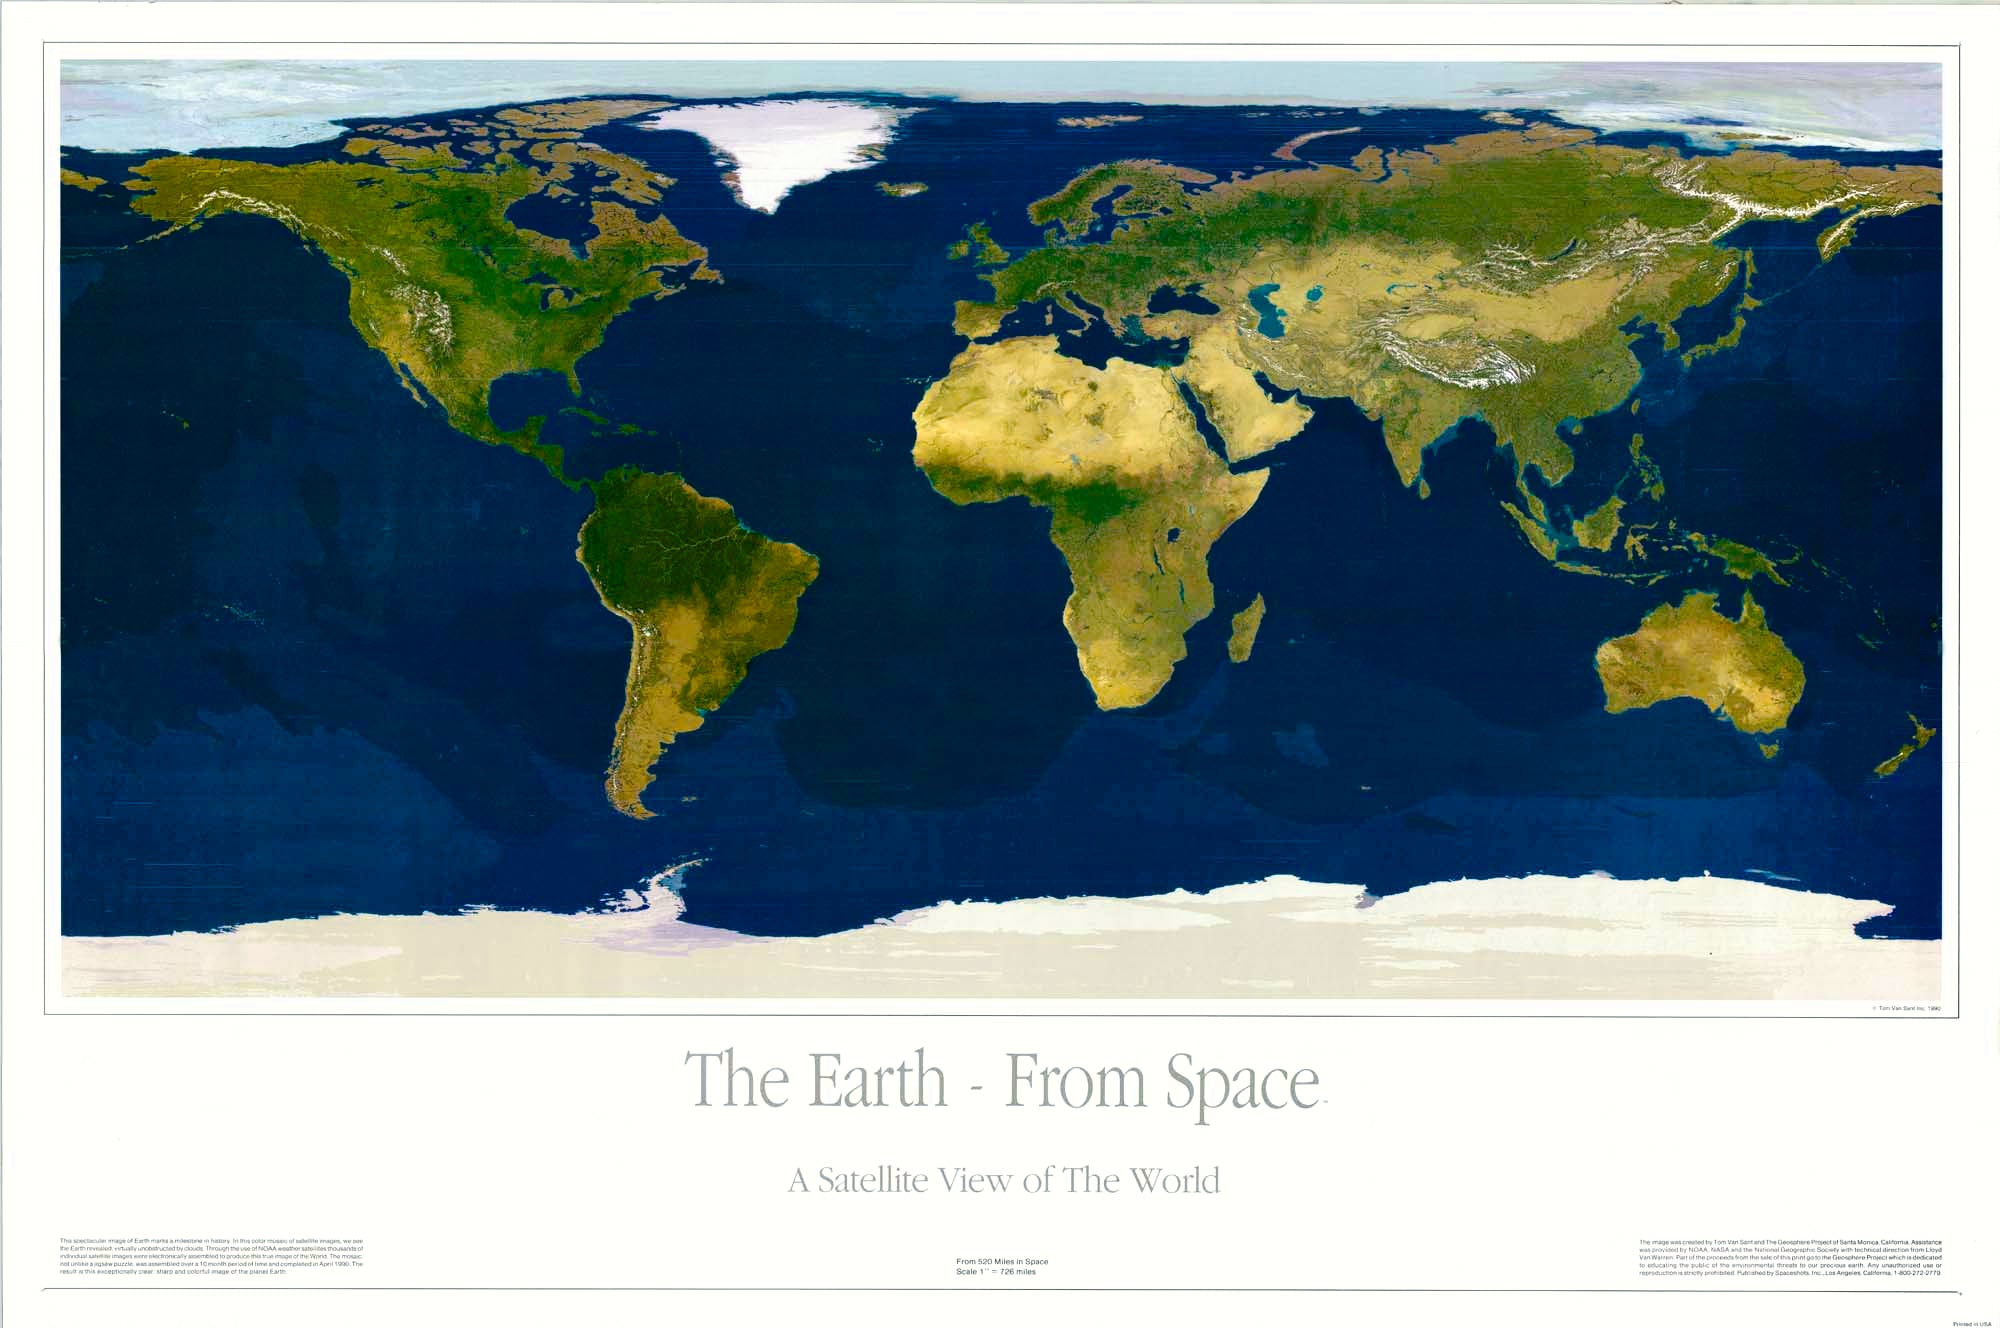 (World) The Earth - From Space